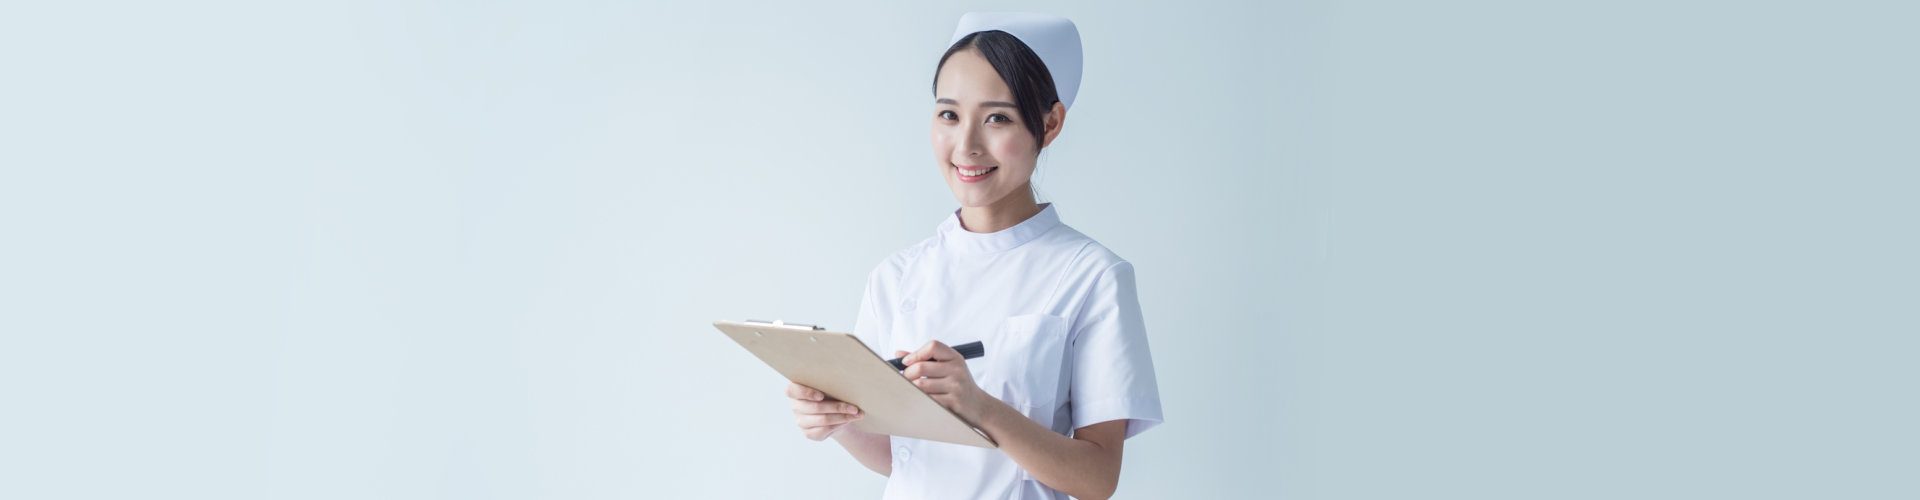 nurse smiling while carrying clipboard